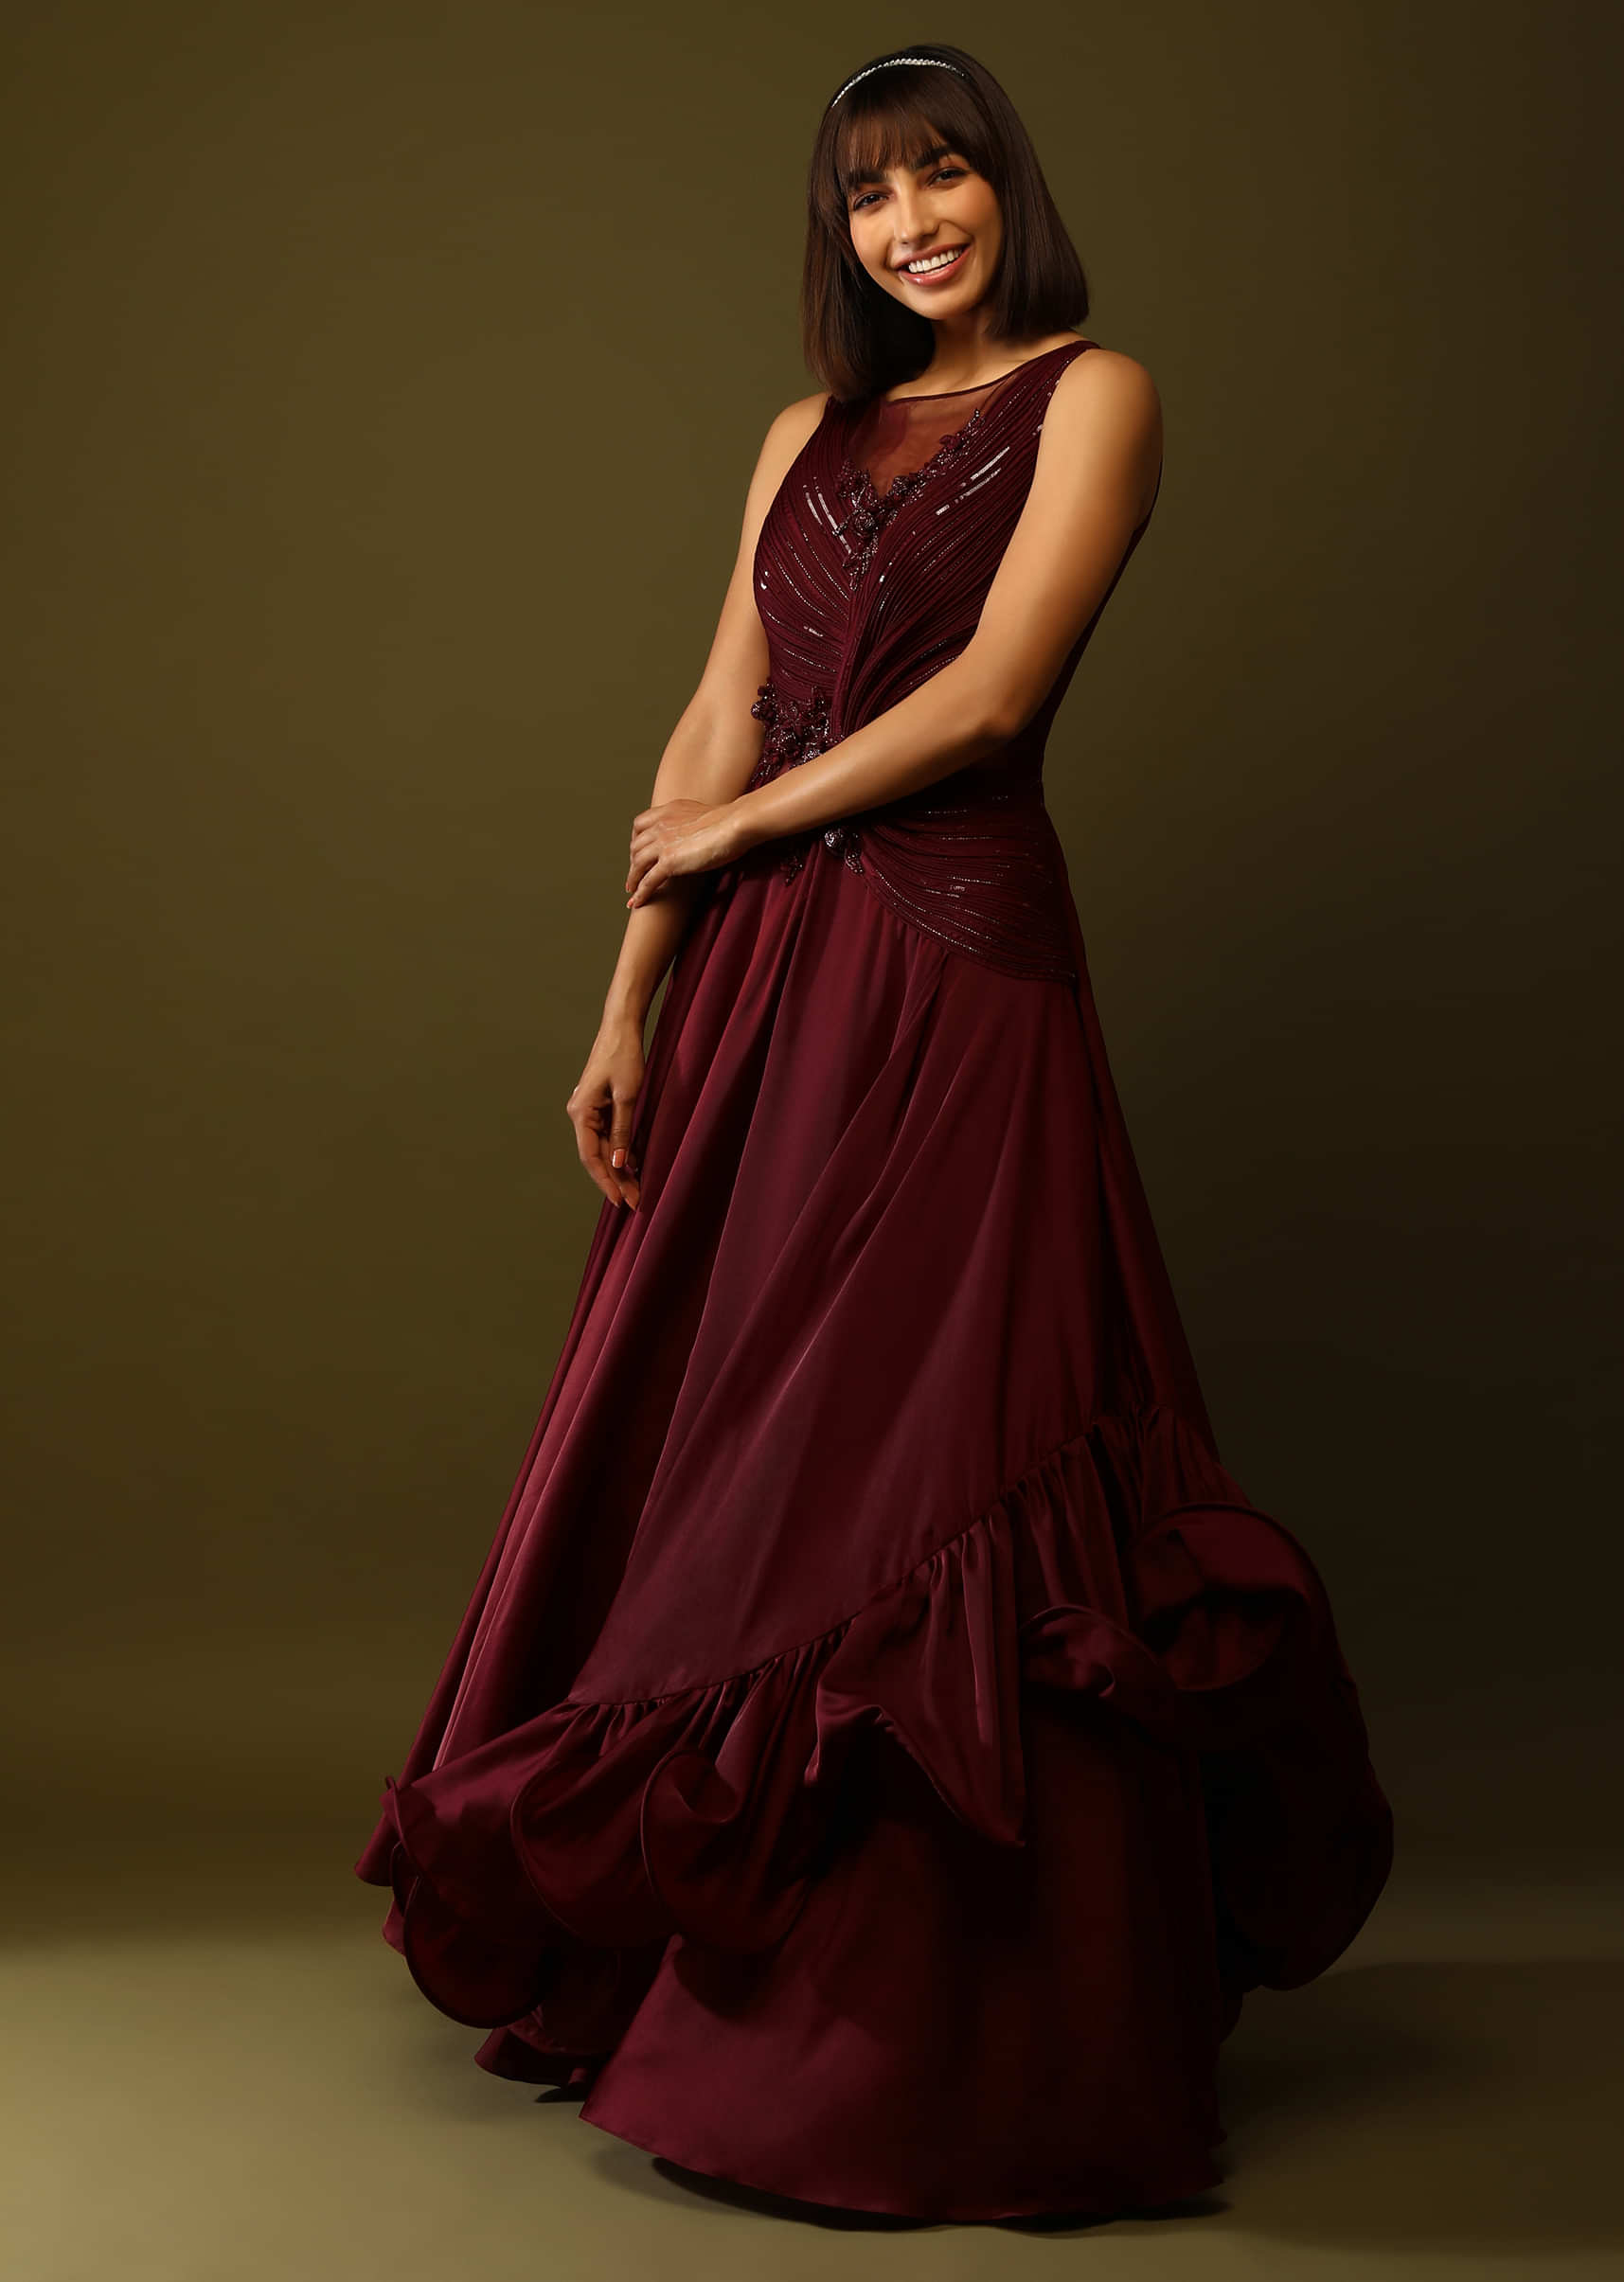 Maroon Gown With Ruched Bodice And Fancy Ruffled Hem  